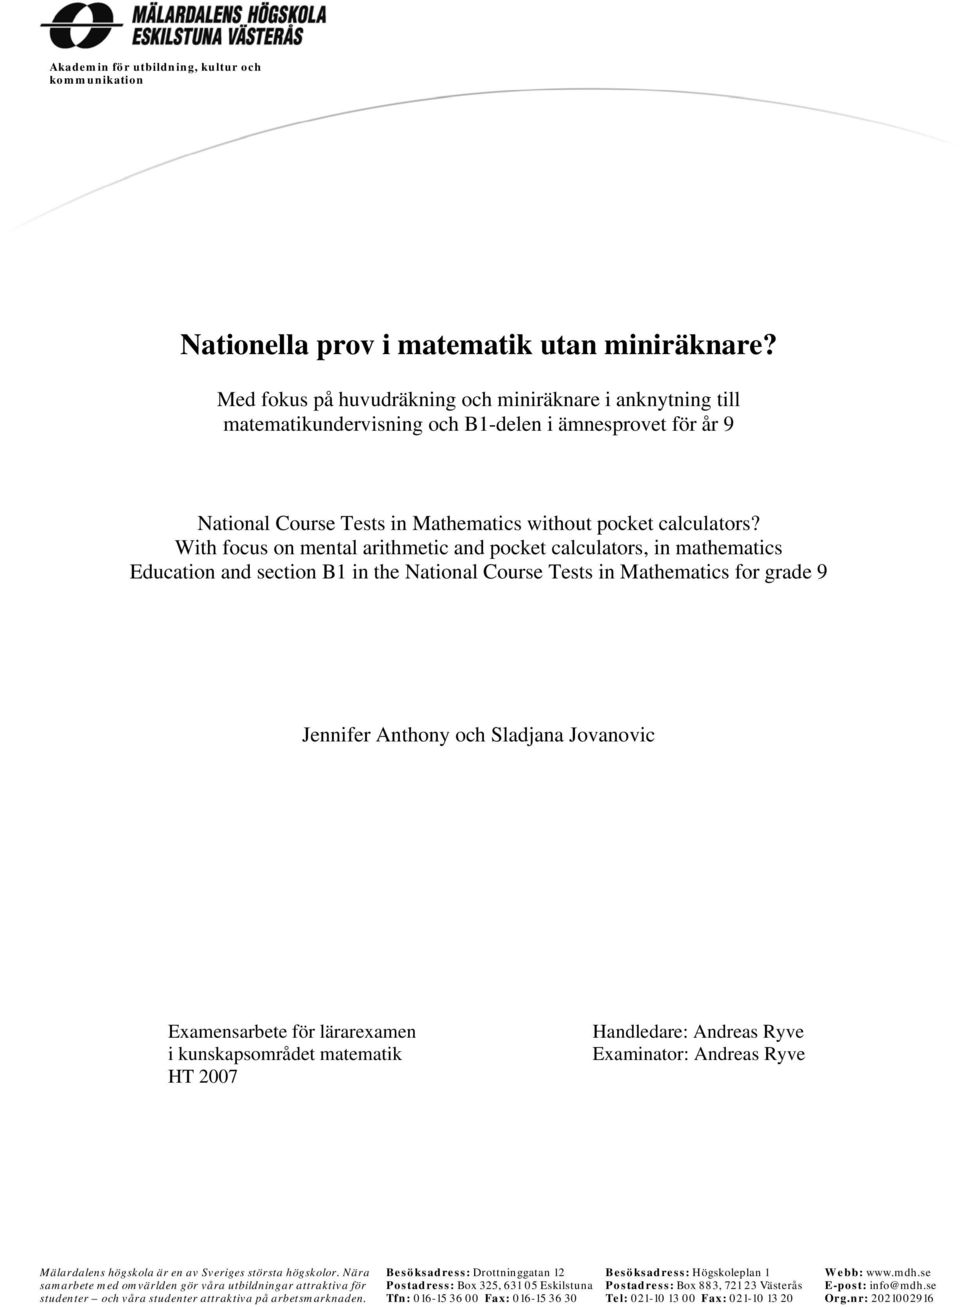 With focus on mental arithmetic and pocket calculators, in mathematics Education and section B1 in the National Course Tests in Mathematics for grade 9 Jennifer Anthony och Sladjana Jovanovic